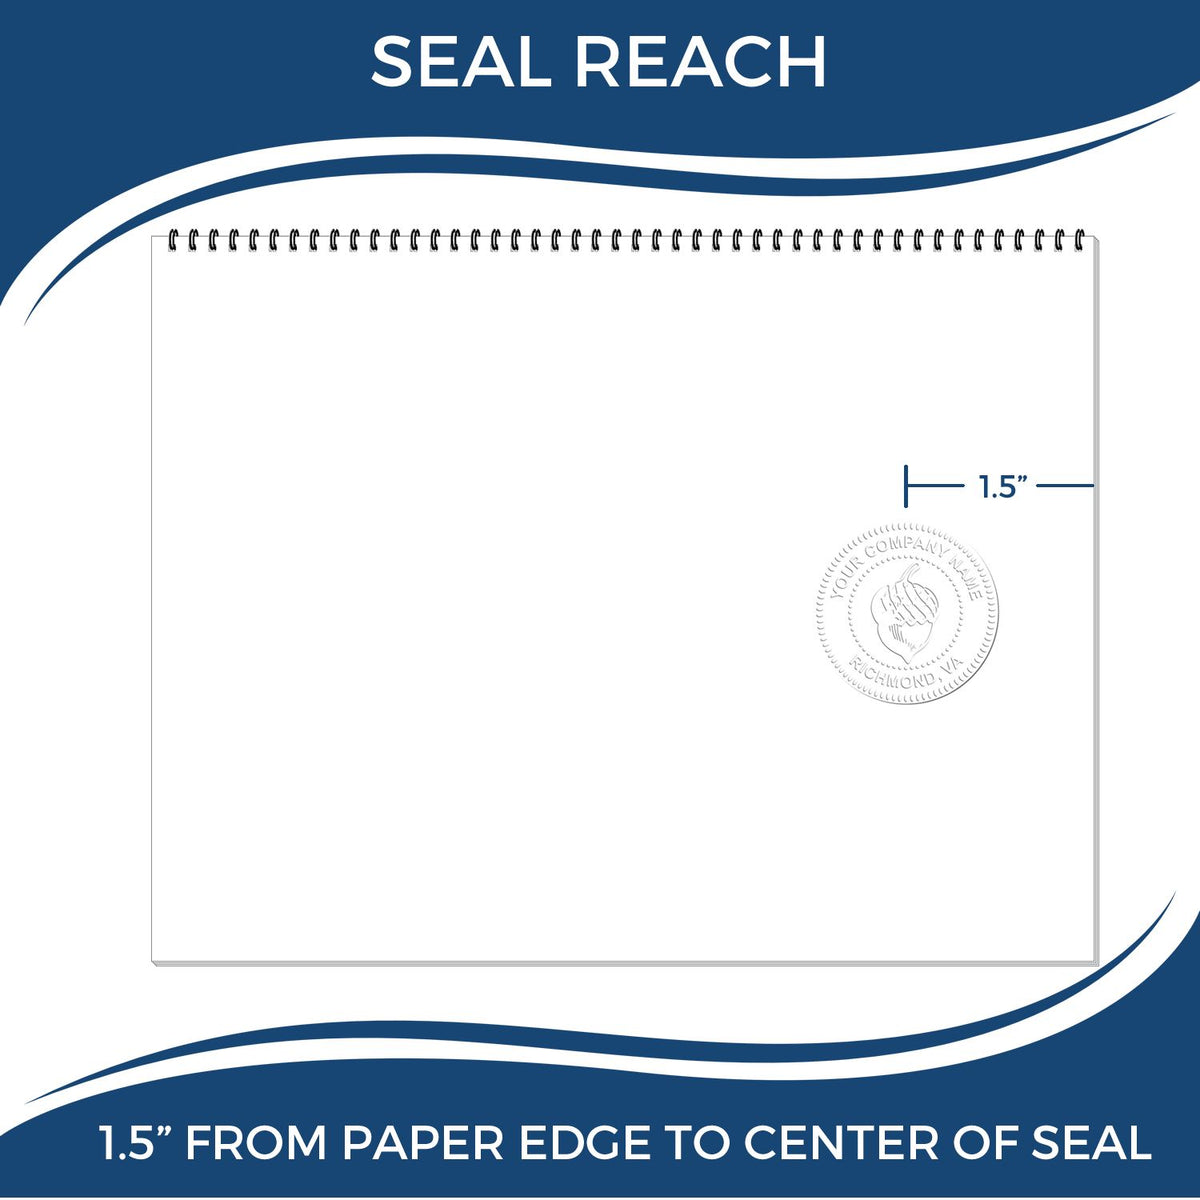 An infographic showing the seal reach which is represented by a ruler and a miniature seal image of the Mississippi Desk Architect Embossing Seal